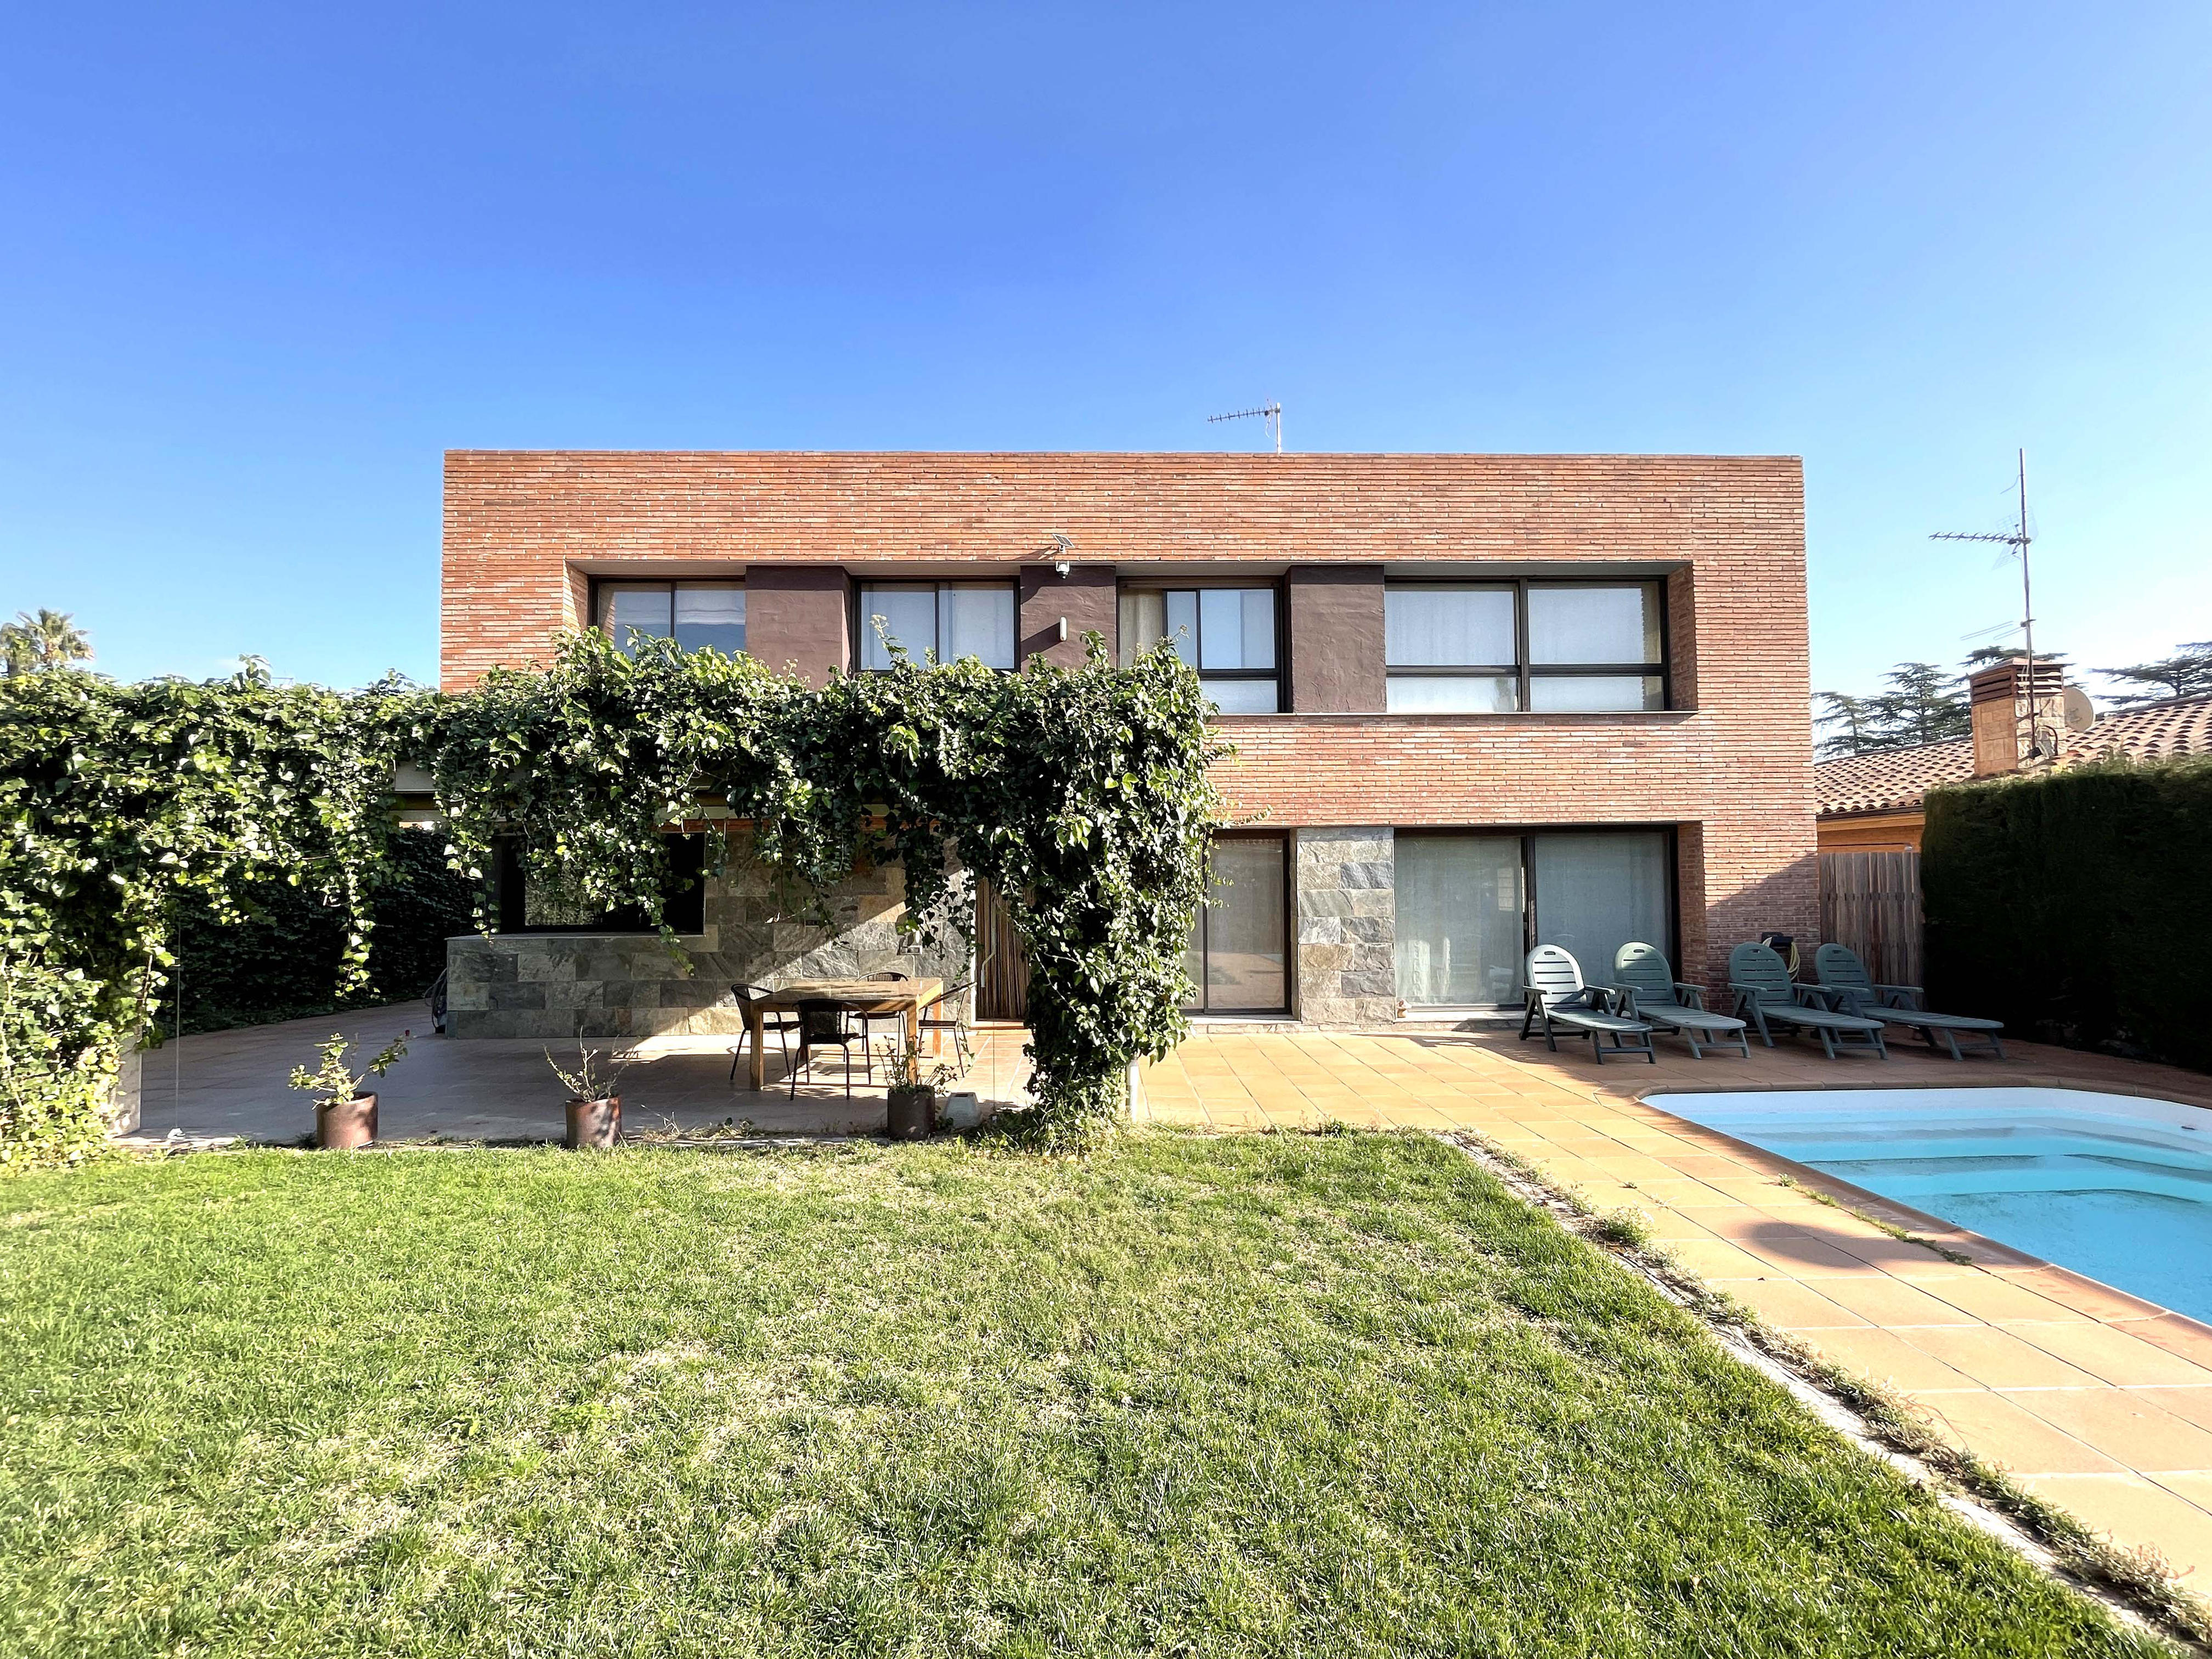 Family house with swimming pool for sale in Reus, Tarragona